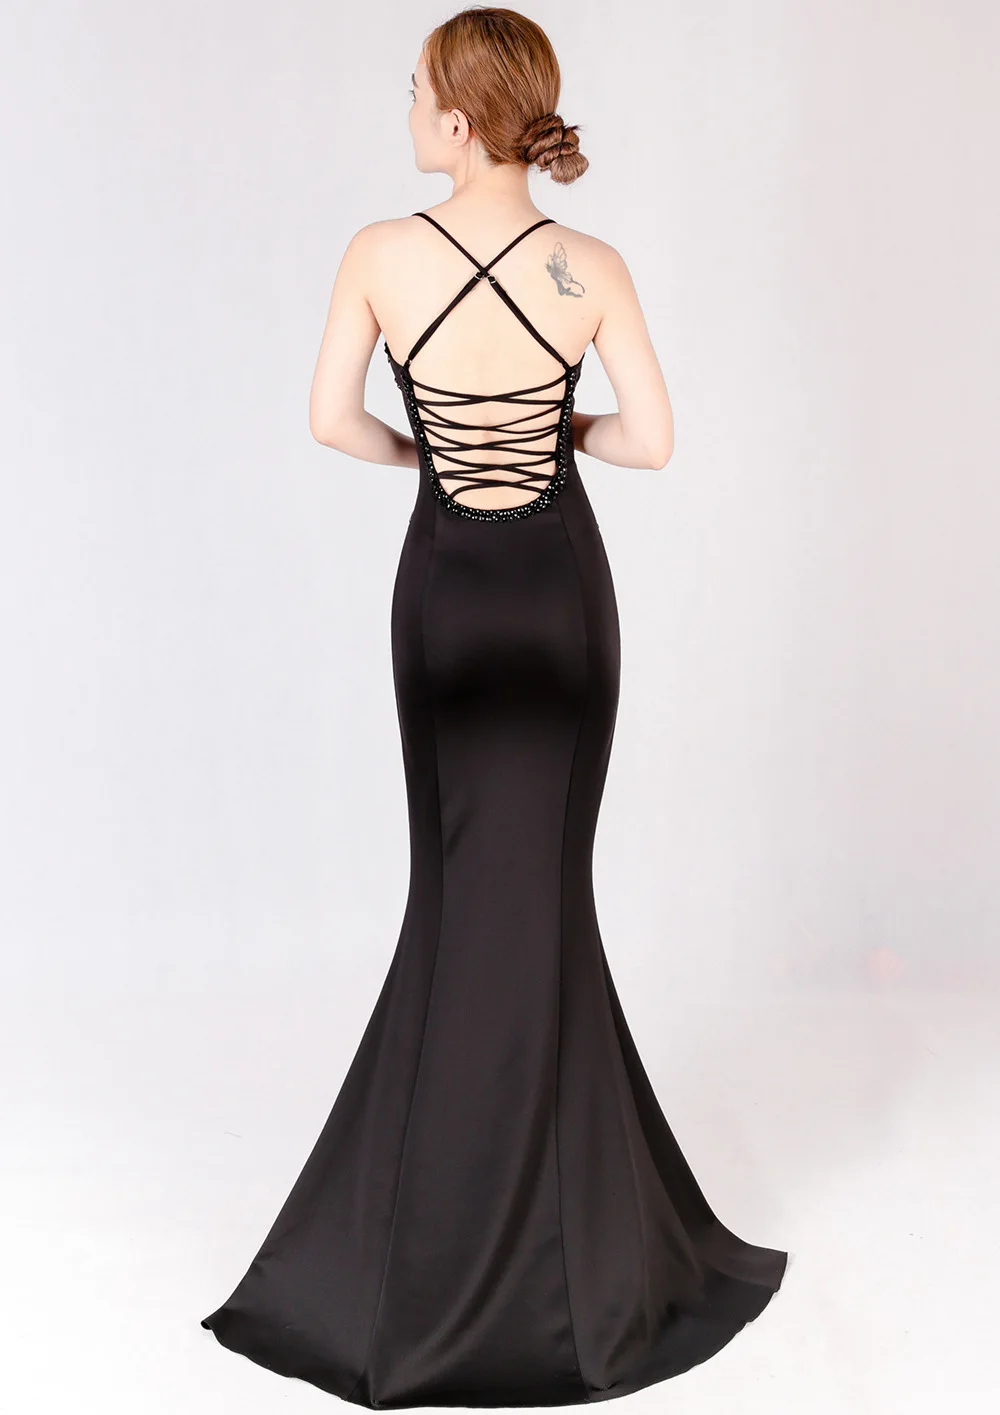 Women Low Chest Split Suspender Perspective Wrap Dresses Performance Sexy Nightclub Party Dress Backless Mermaid Long Dresses mother of the bride dresses